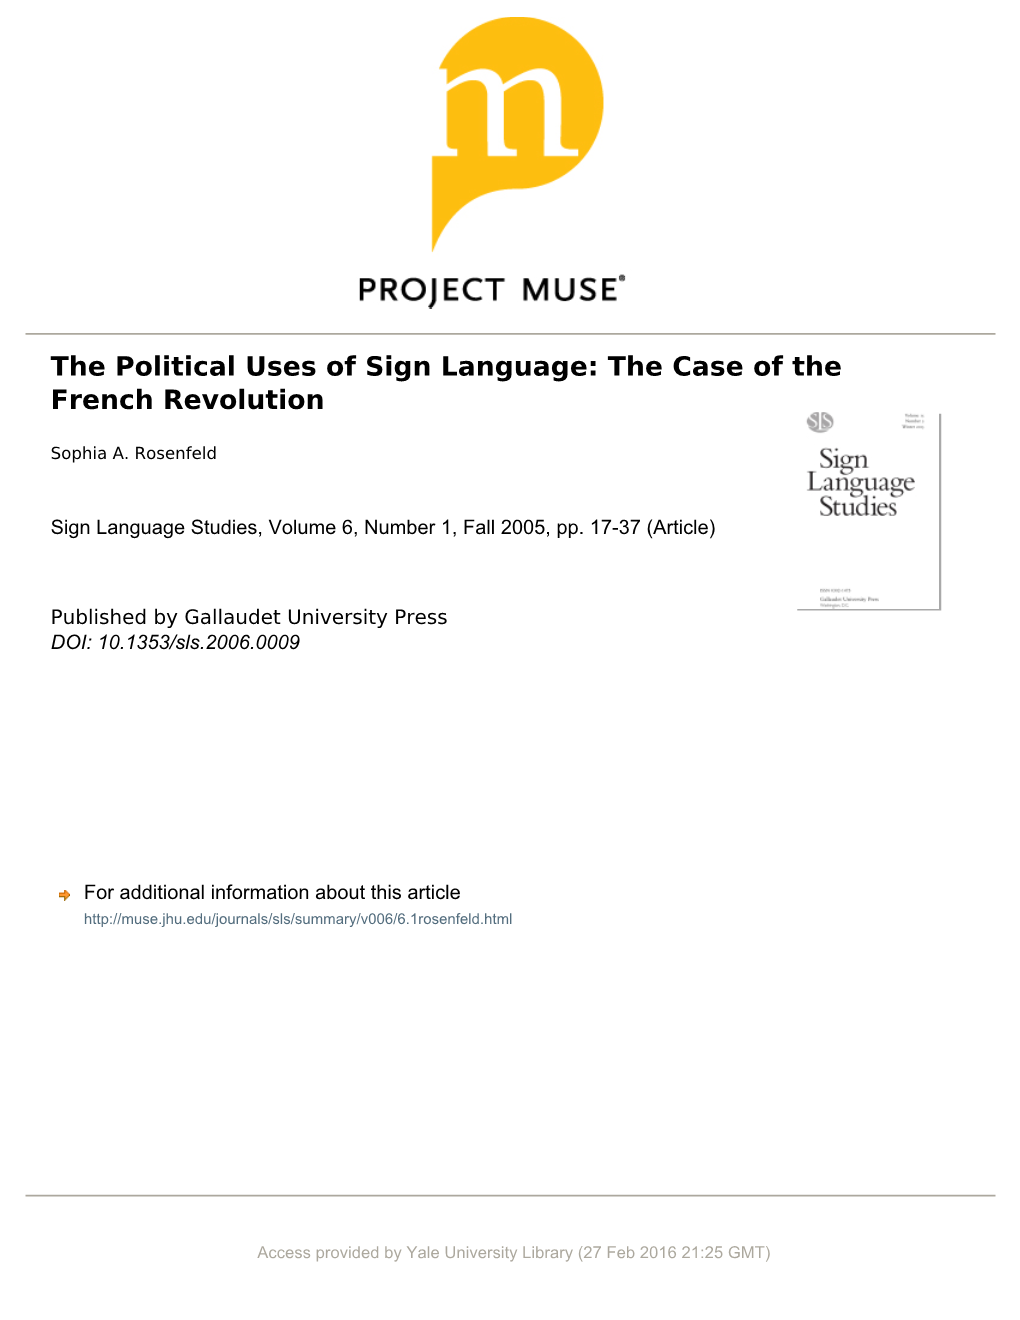 The Political Uses of Sign Language: the Case of the French Revolution